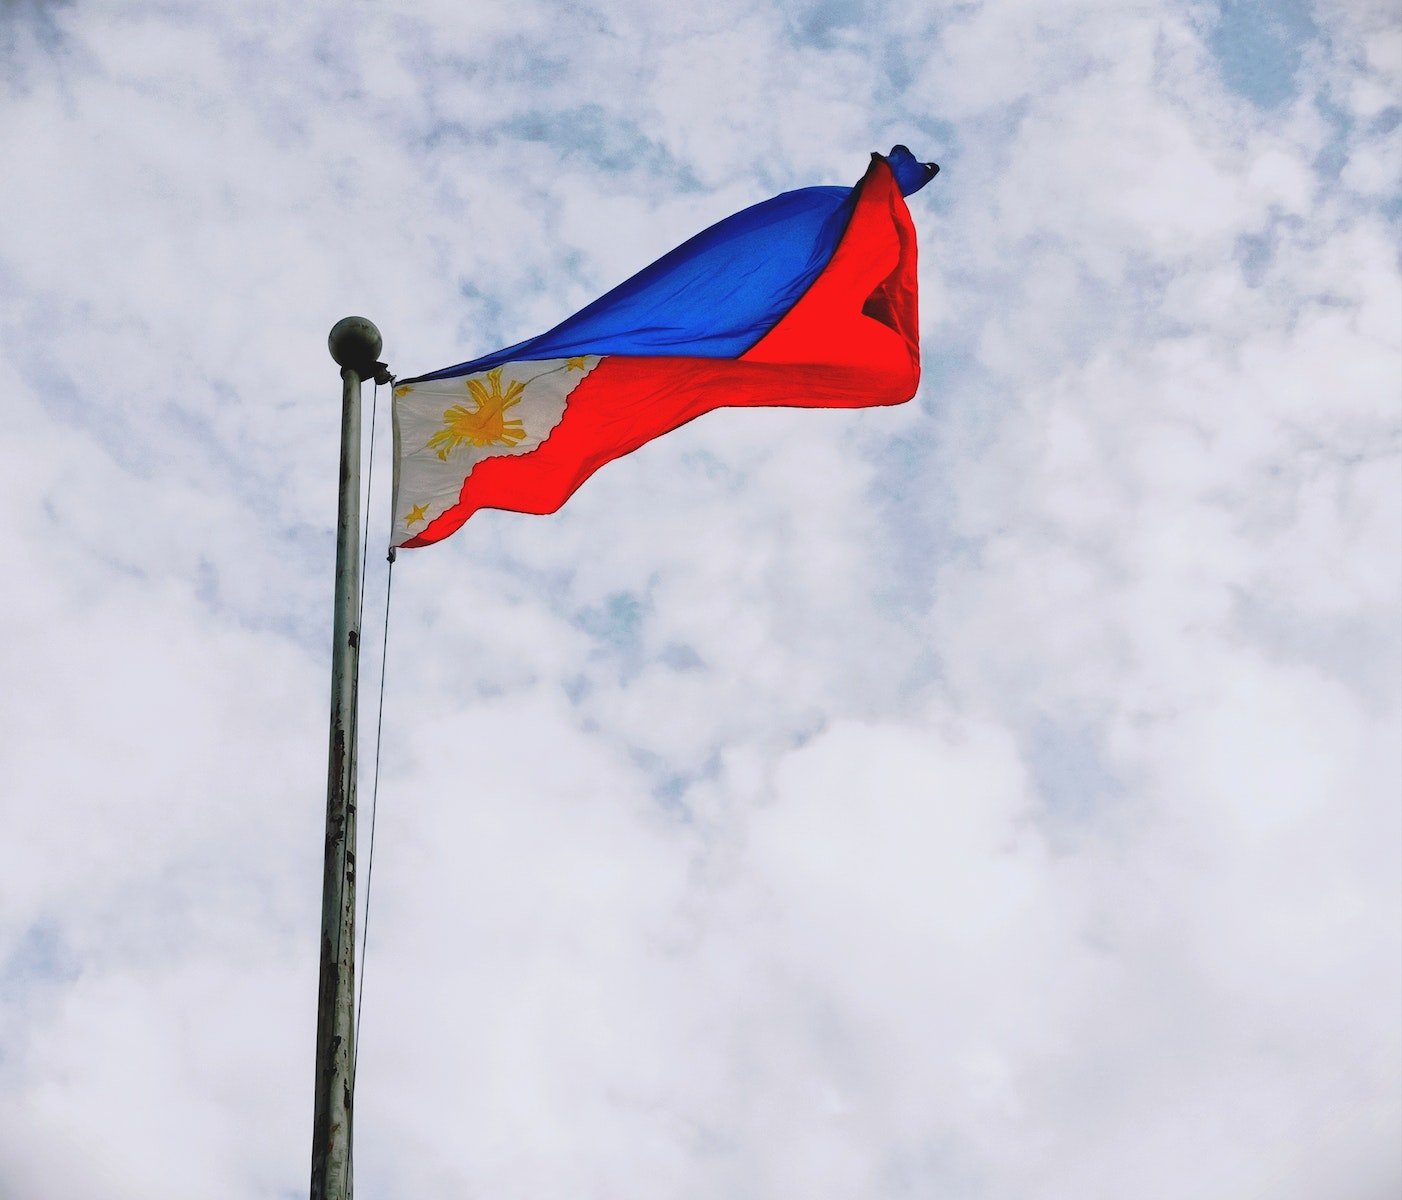 Philippines Flag Swaying by the Wind Under White Sky